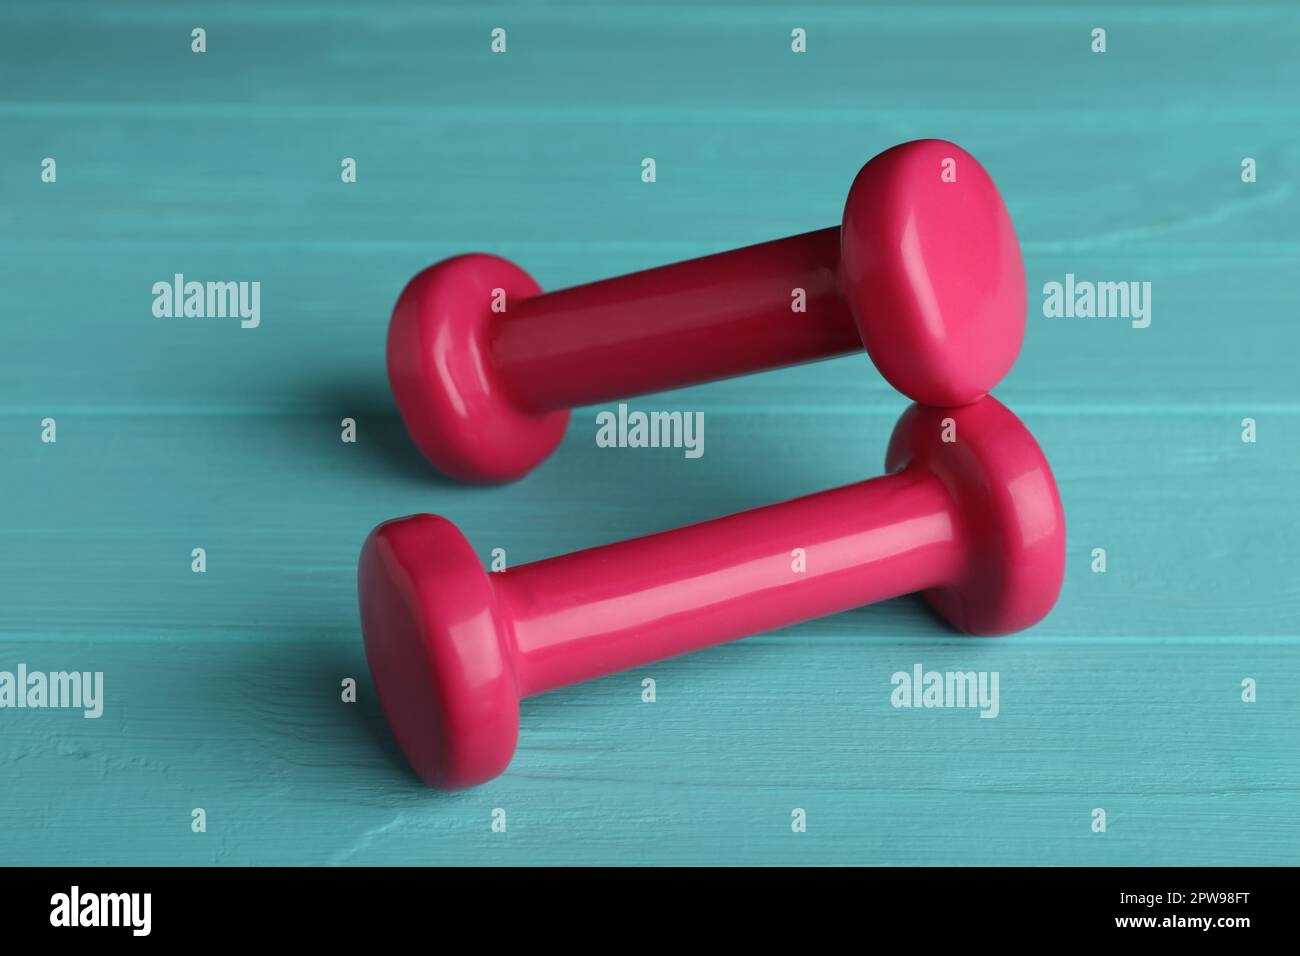 Pink vinyl dumbbells on turquoise wooden table Stock Photo